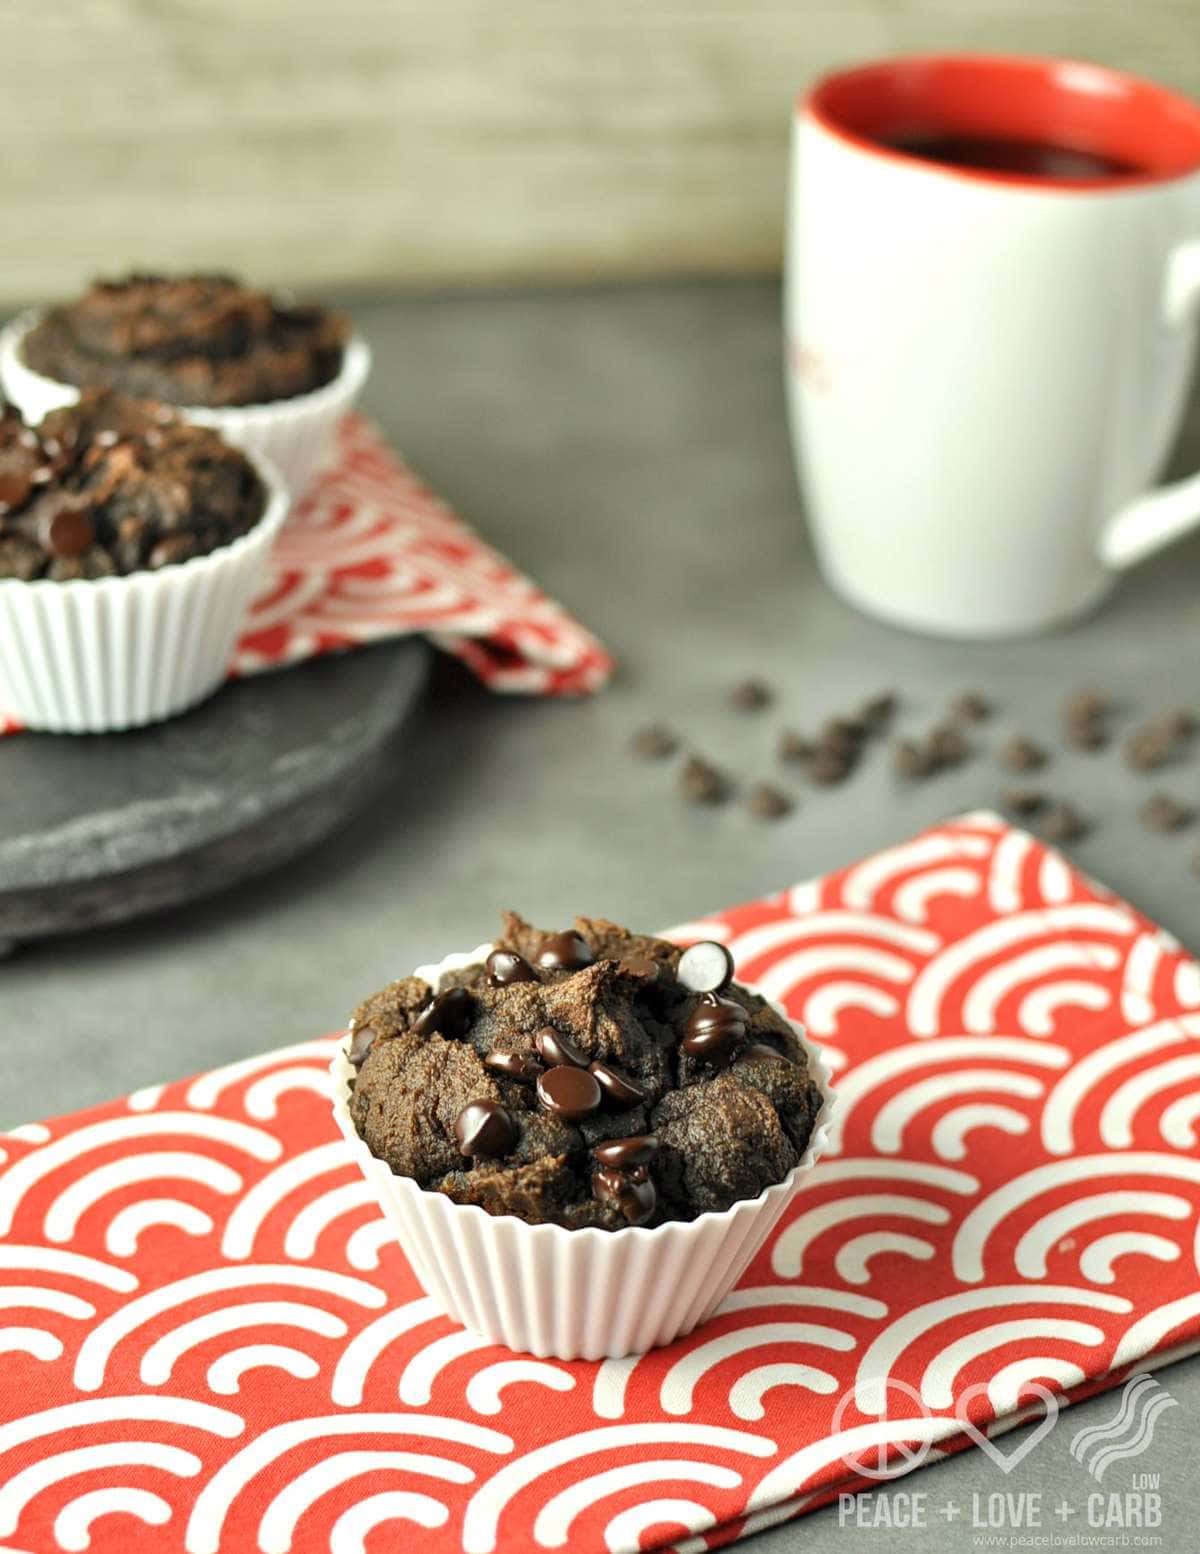 a chocolate muffin on a red and white striped towel, with more muffins and a mug of coffee in the background. 